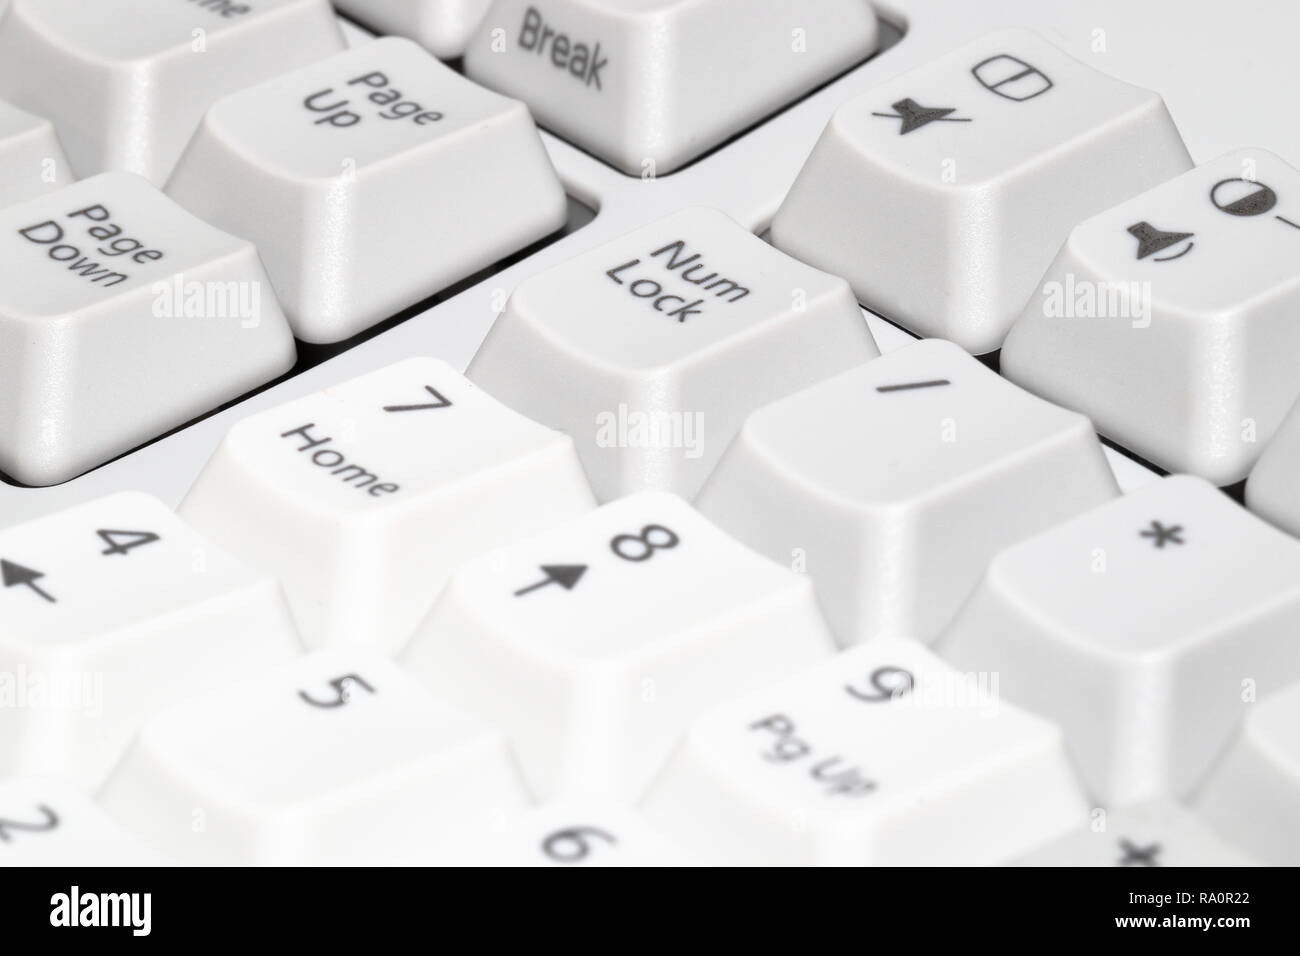 Modern computer keyboard. some part of white computer keyboard, Focus on numeric keypad and special keys. Stock Photo